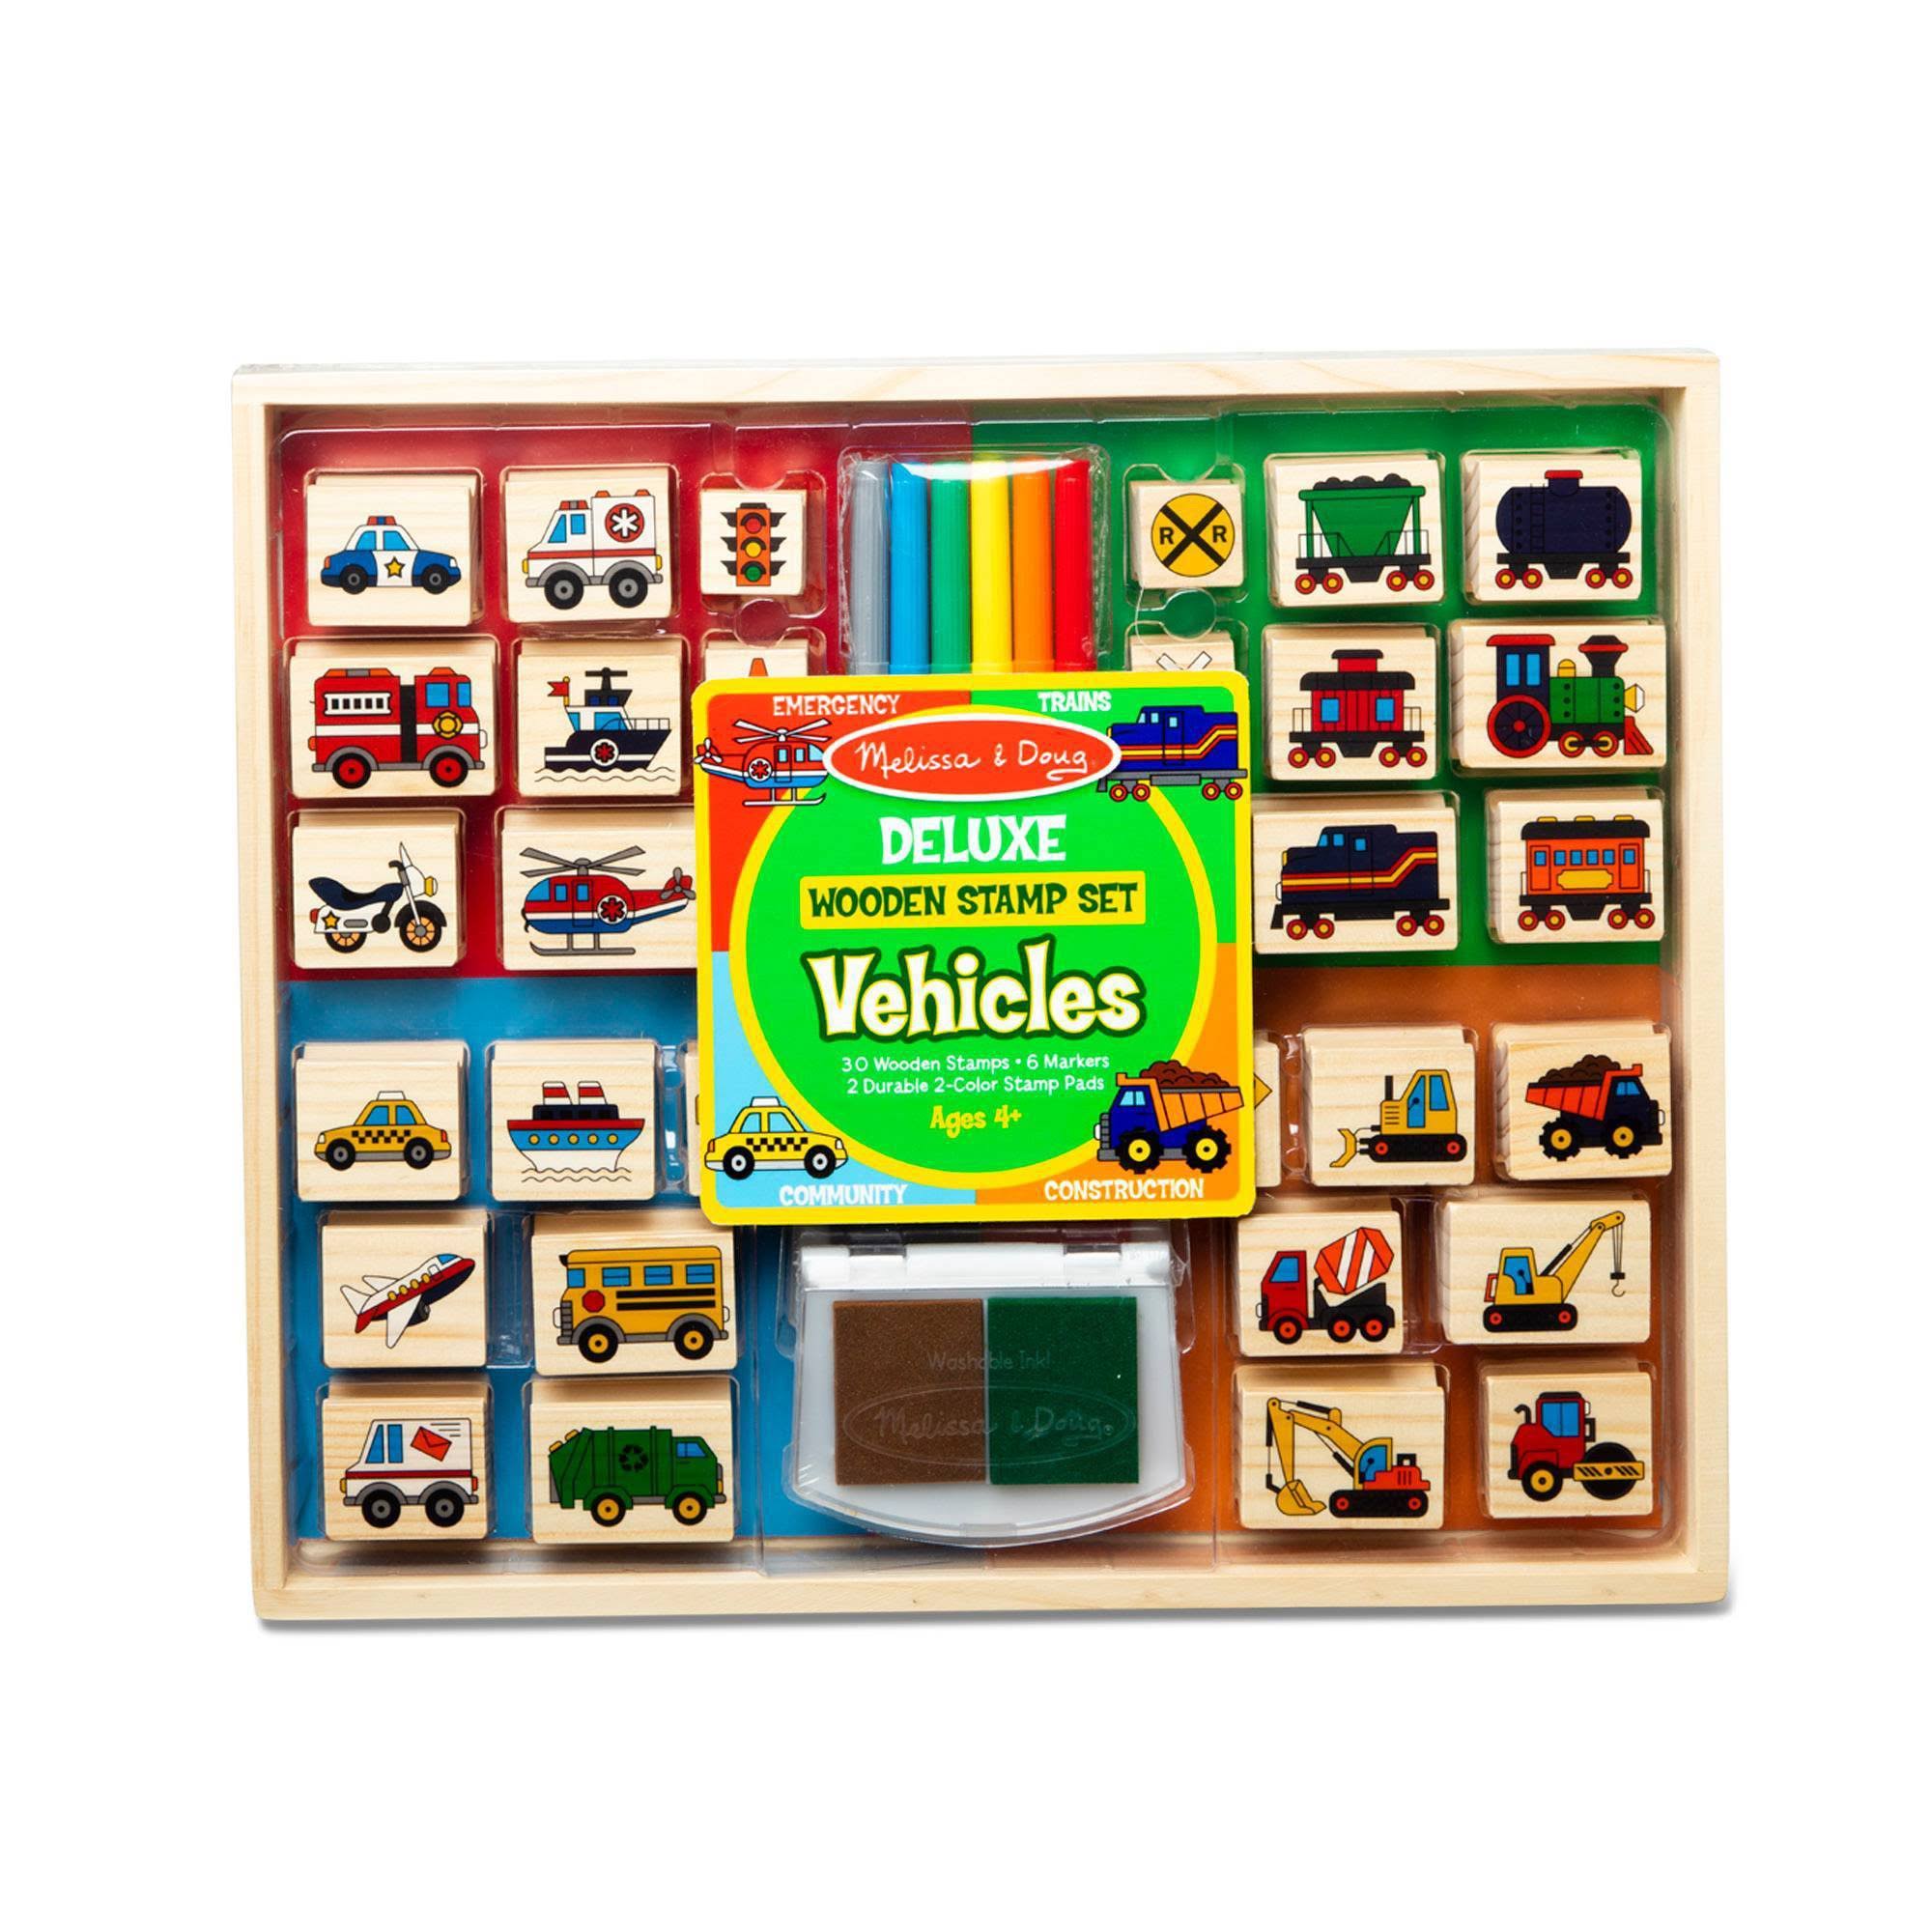 Melissa & Doug Deluxe Wooden Stamp and Coloring Set Vehicles (30